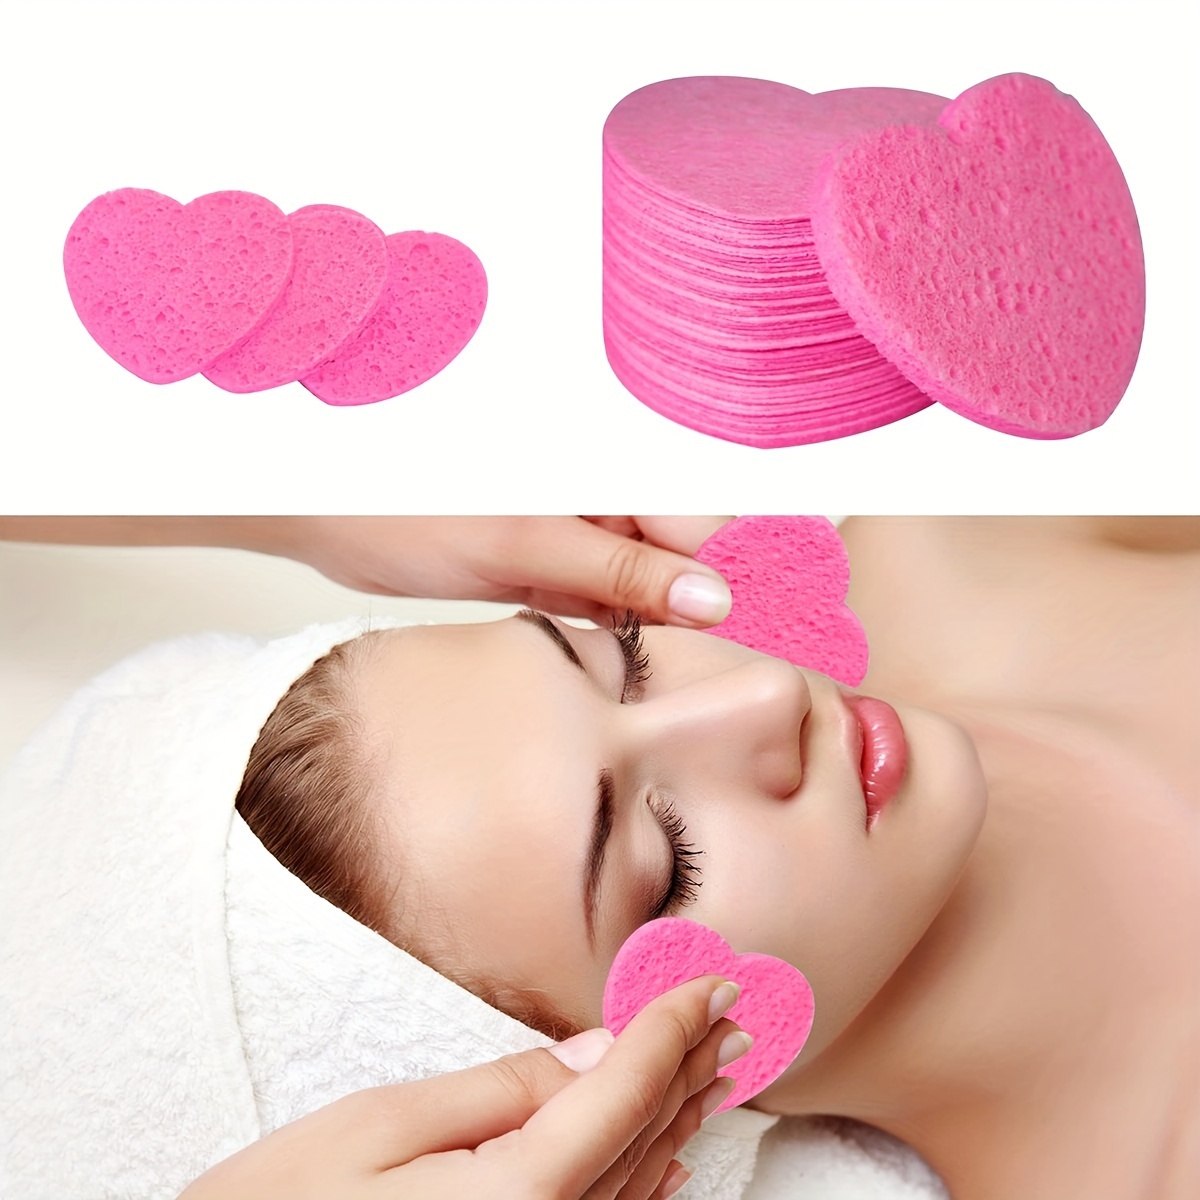 

10pcs, Heart-shaped Compressed Sponges, Travel-friendly, Absorbent Cleansing Sponge, Makeup Remover Puff, Facial Cleaning, Beauty Care Tool, Portable